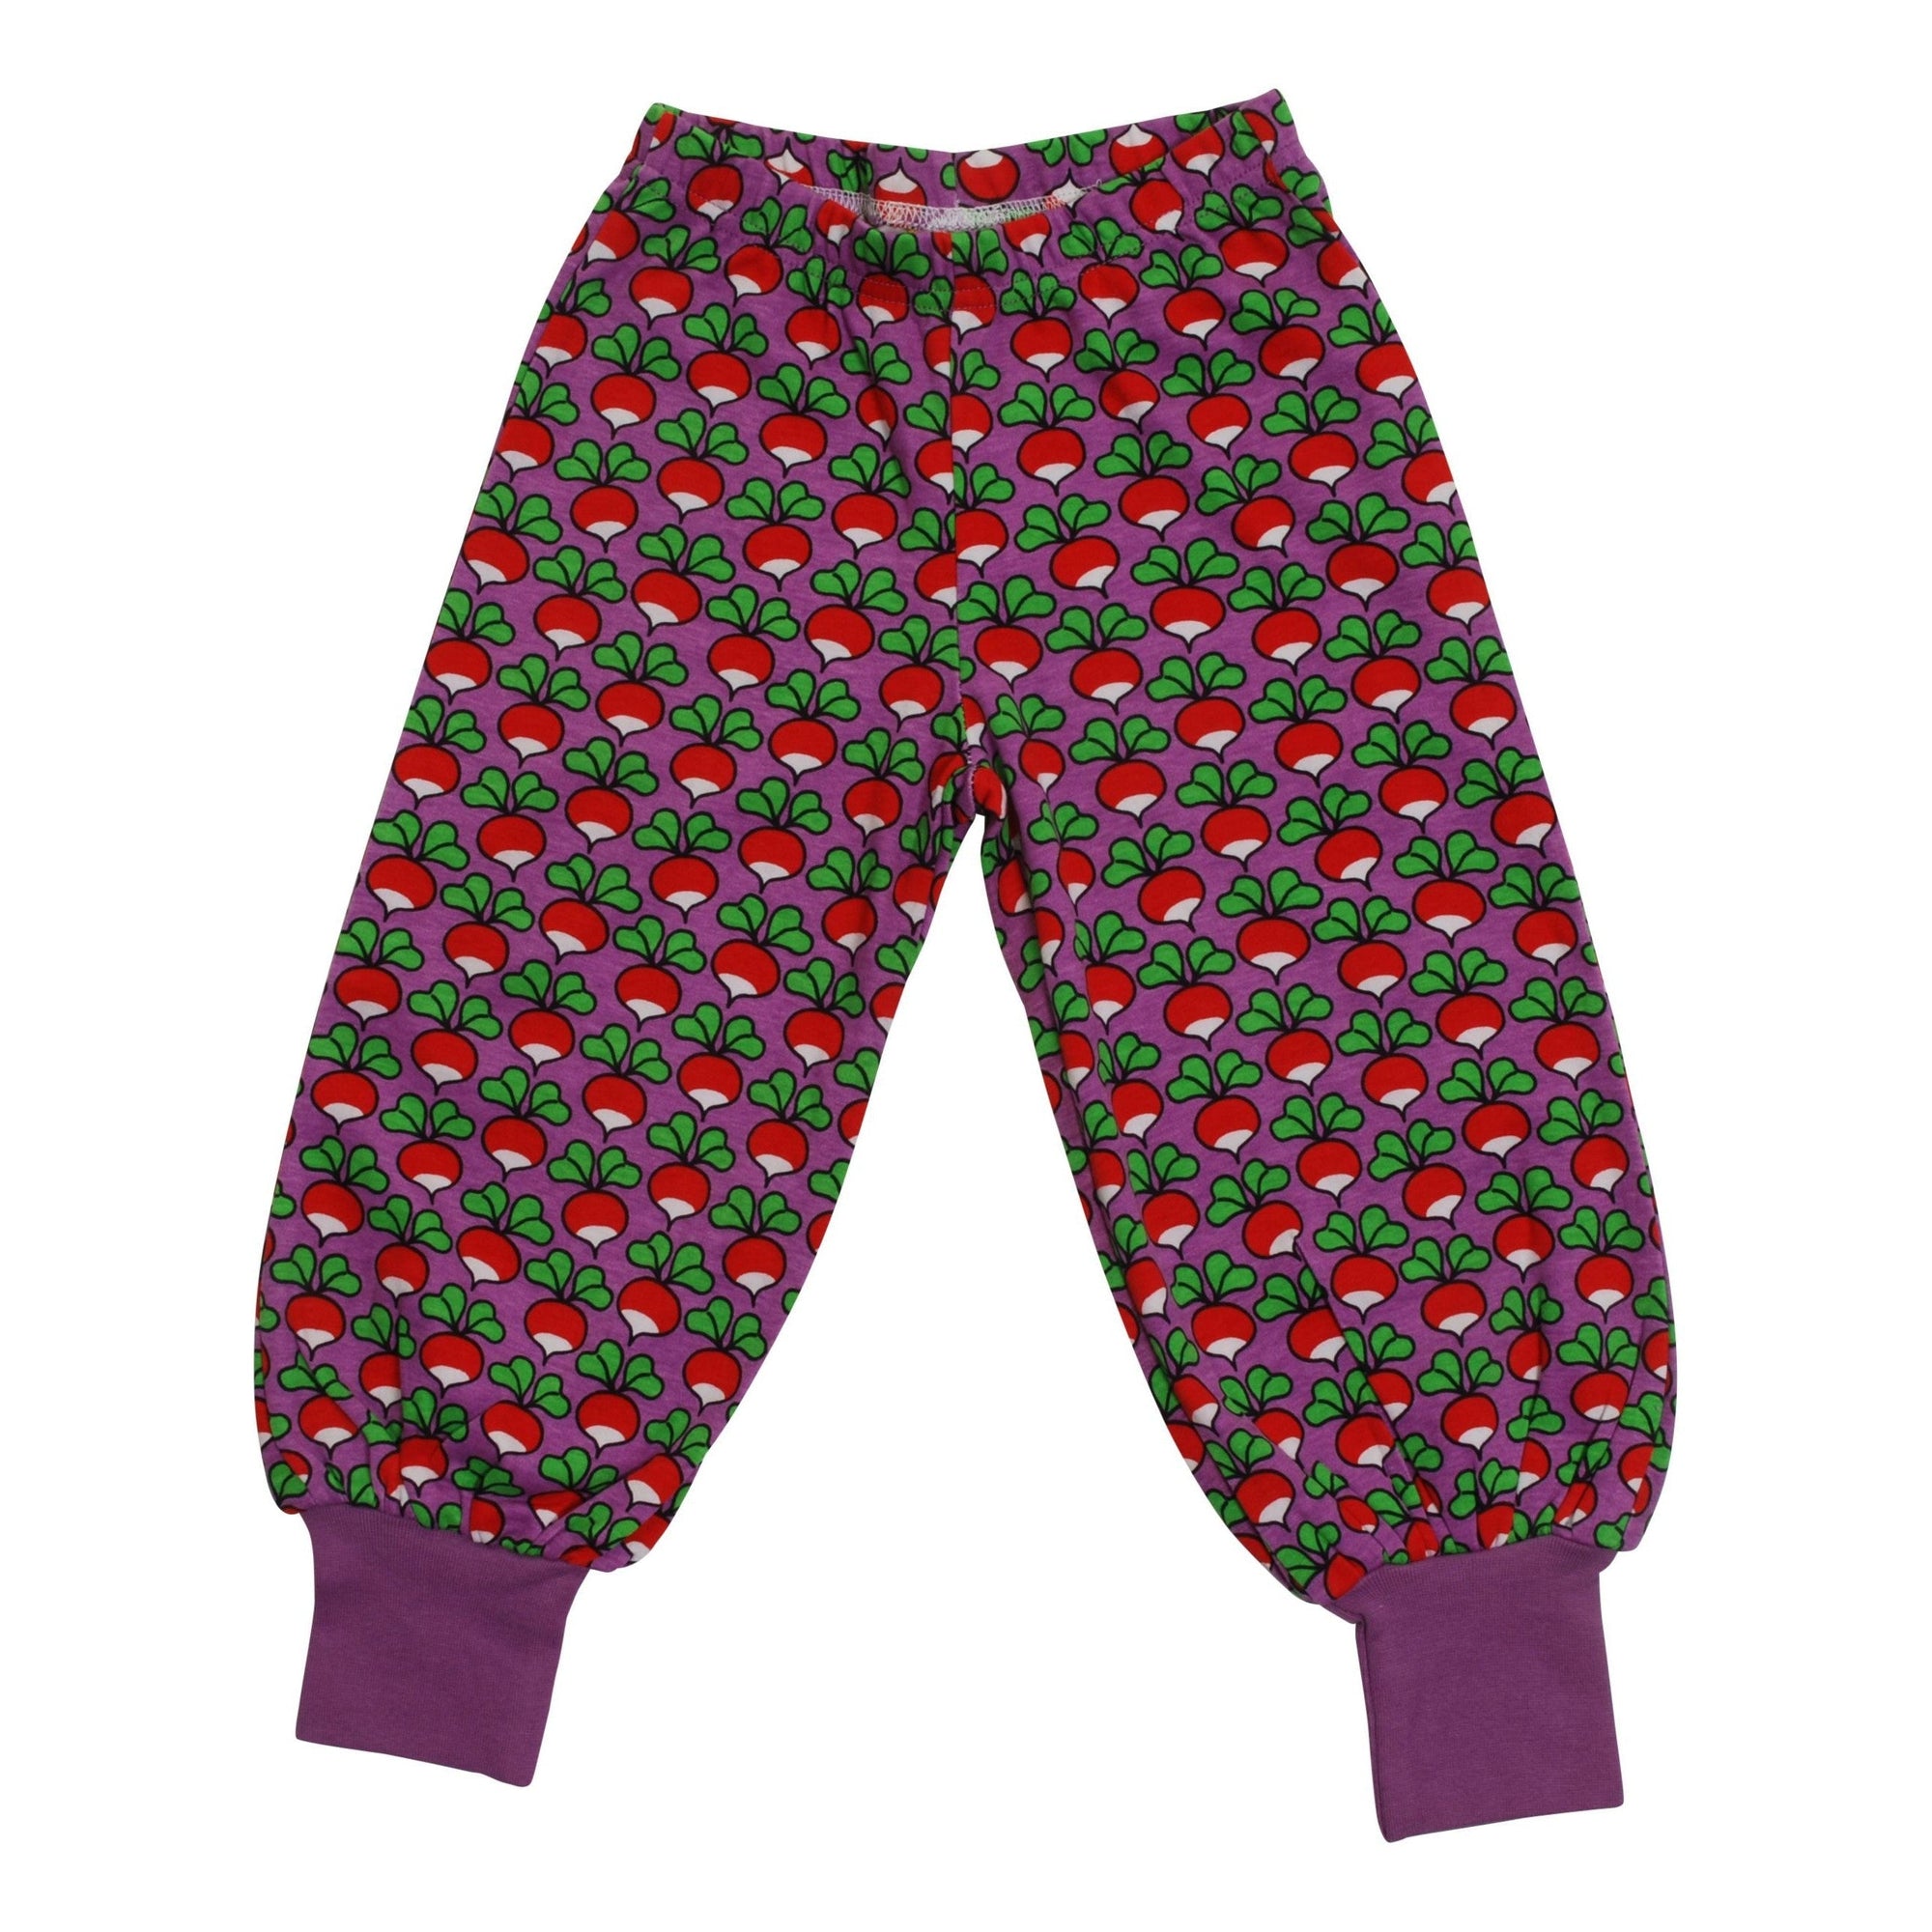 Radish - Amethyst Orchid Baggy Pants - 2 Left Size 8-10 & 12-14 years-Duns Sweden-Modern Rascals